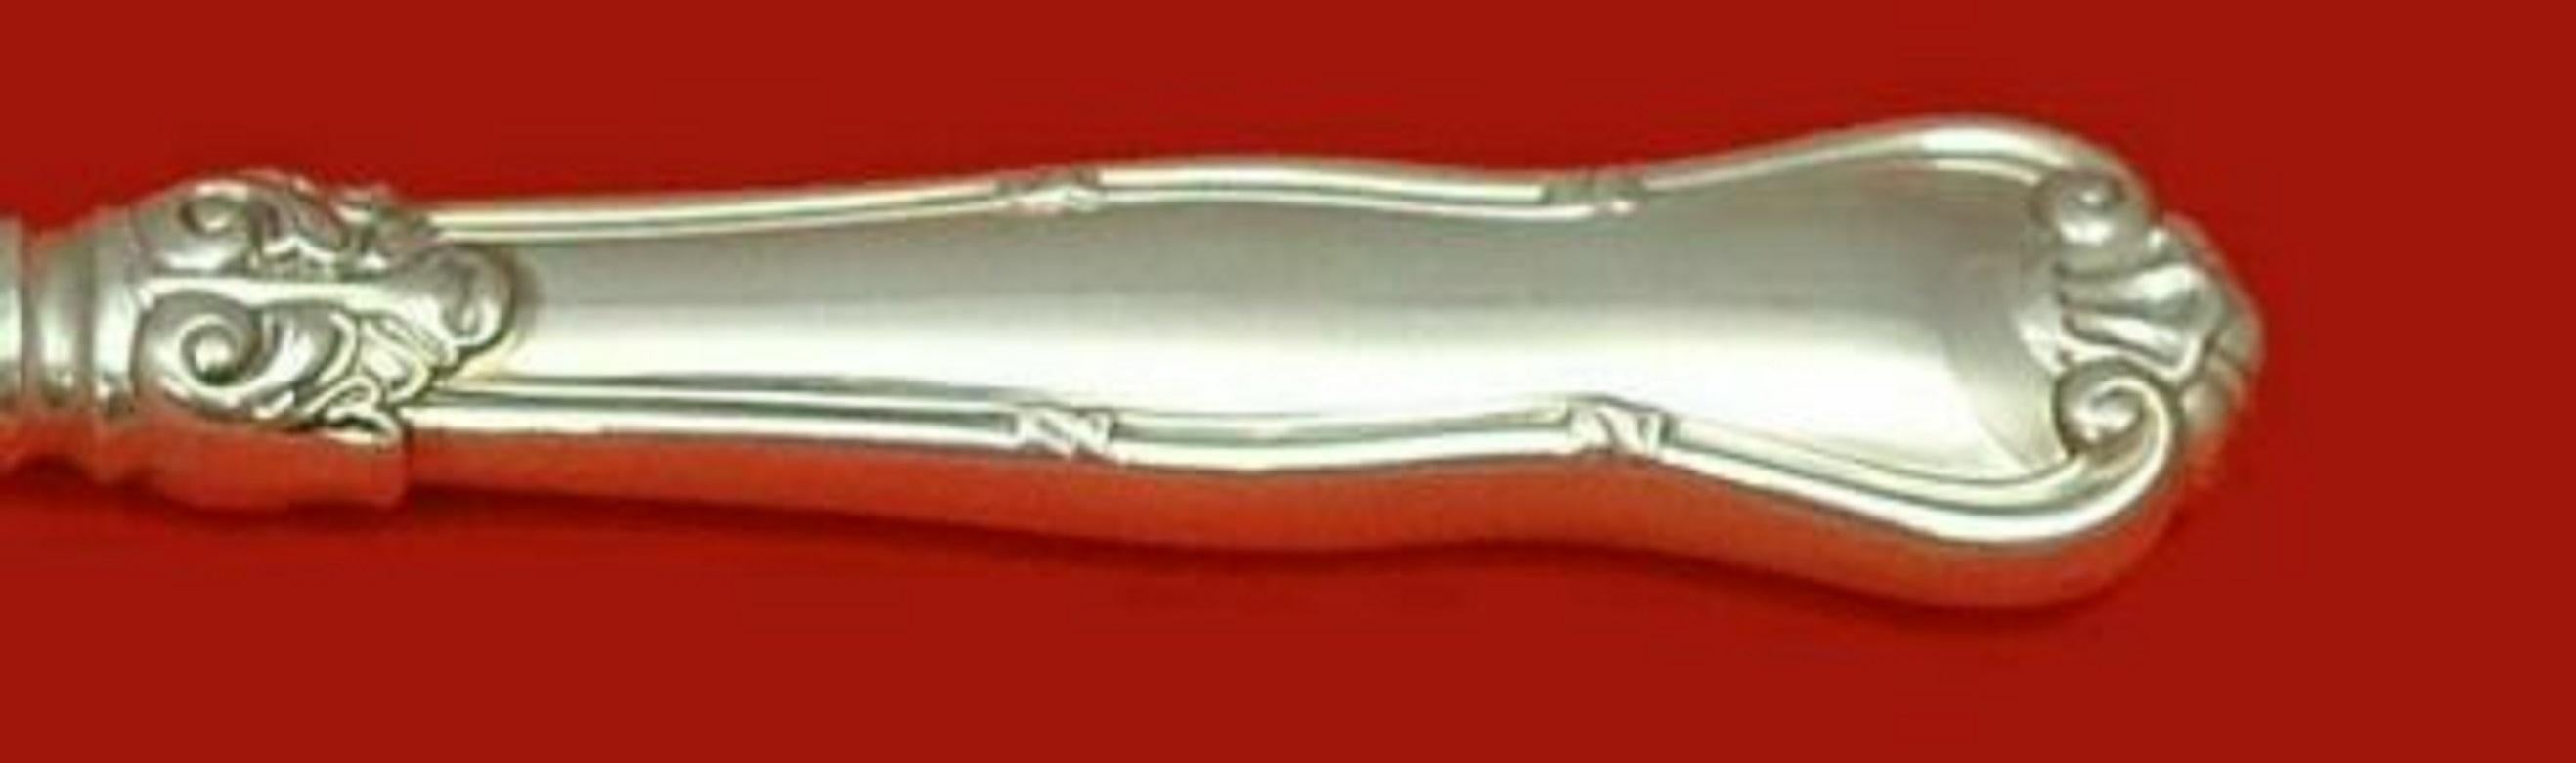 Sterling silver hollow handle with stainless blade dinner knife, French 9 7/8